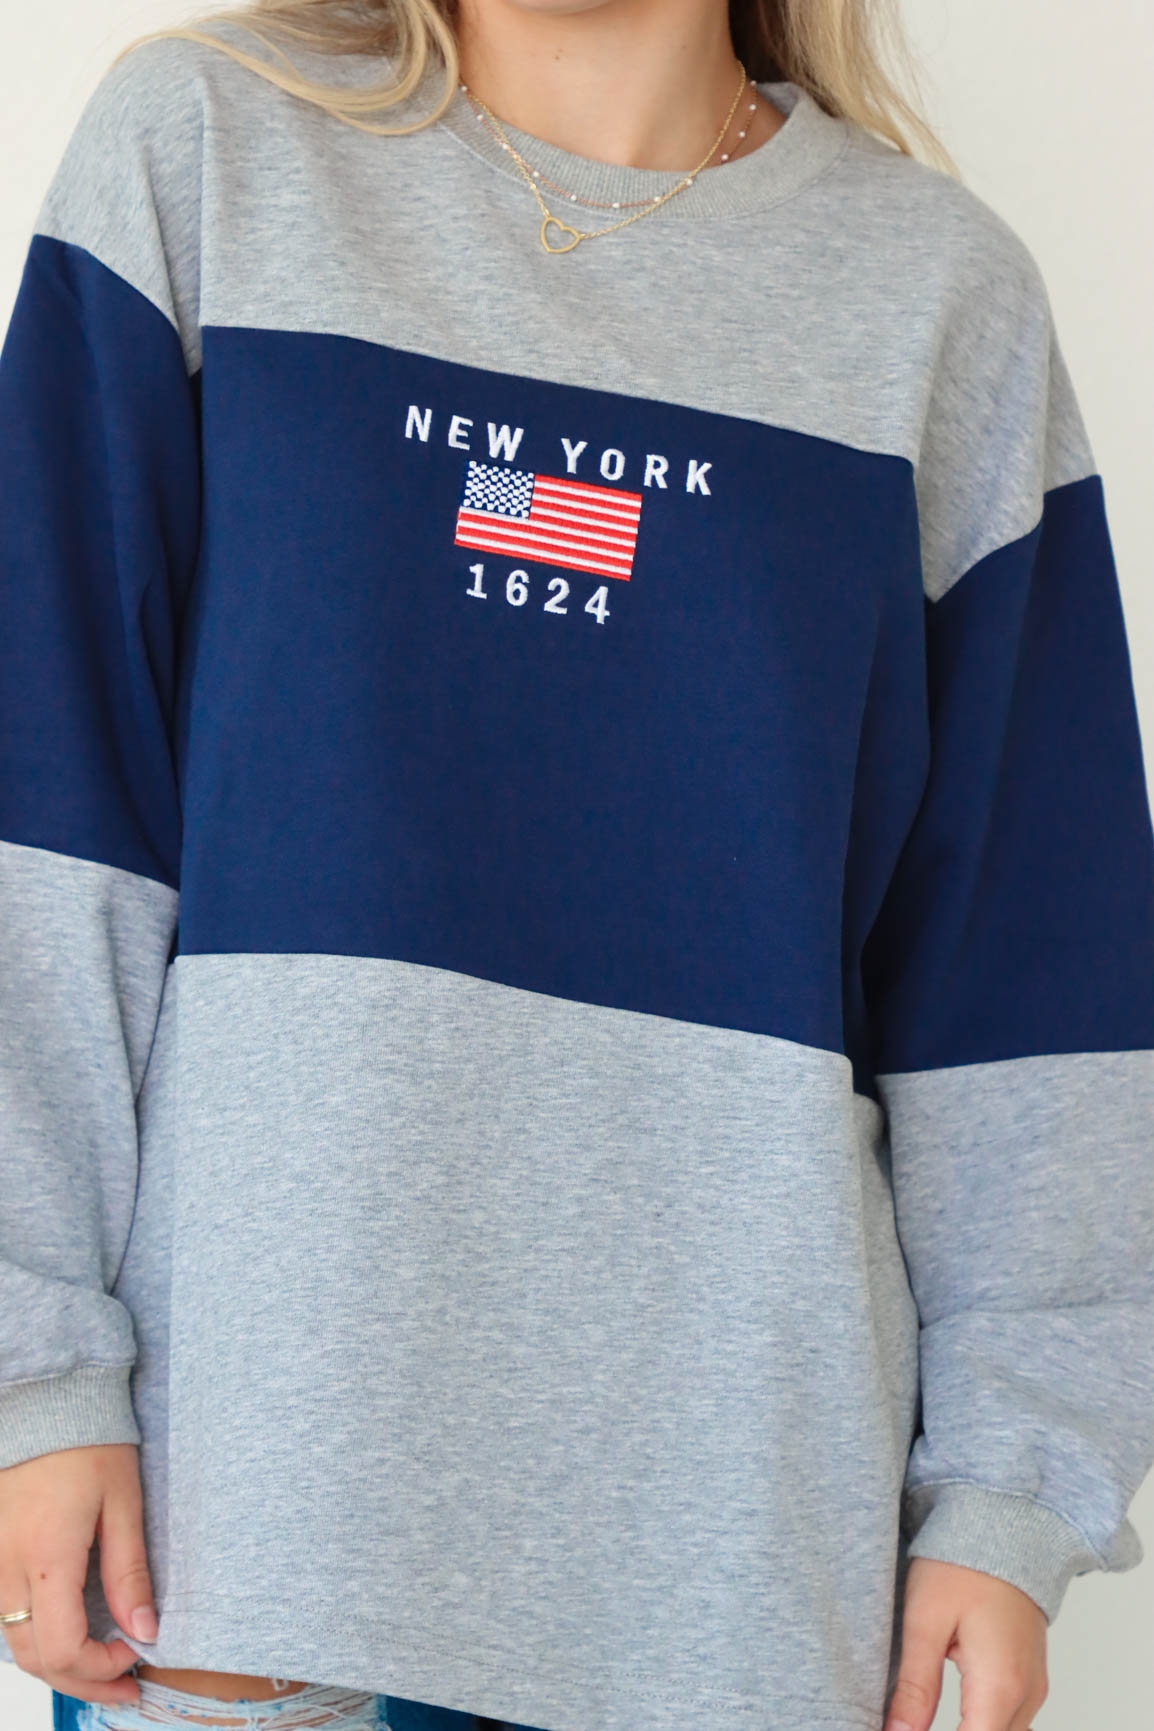 girl wearing gray and navy blue long sleeve shirt with "New York" embroidered graphic